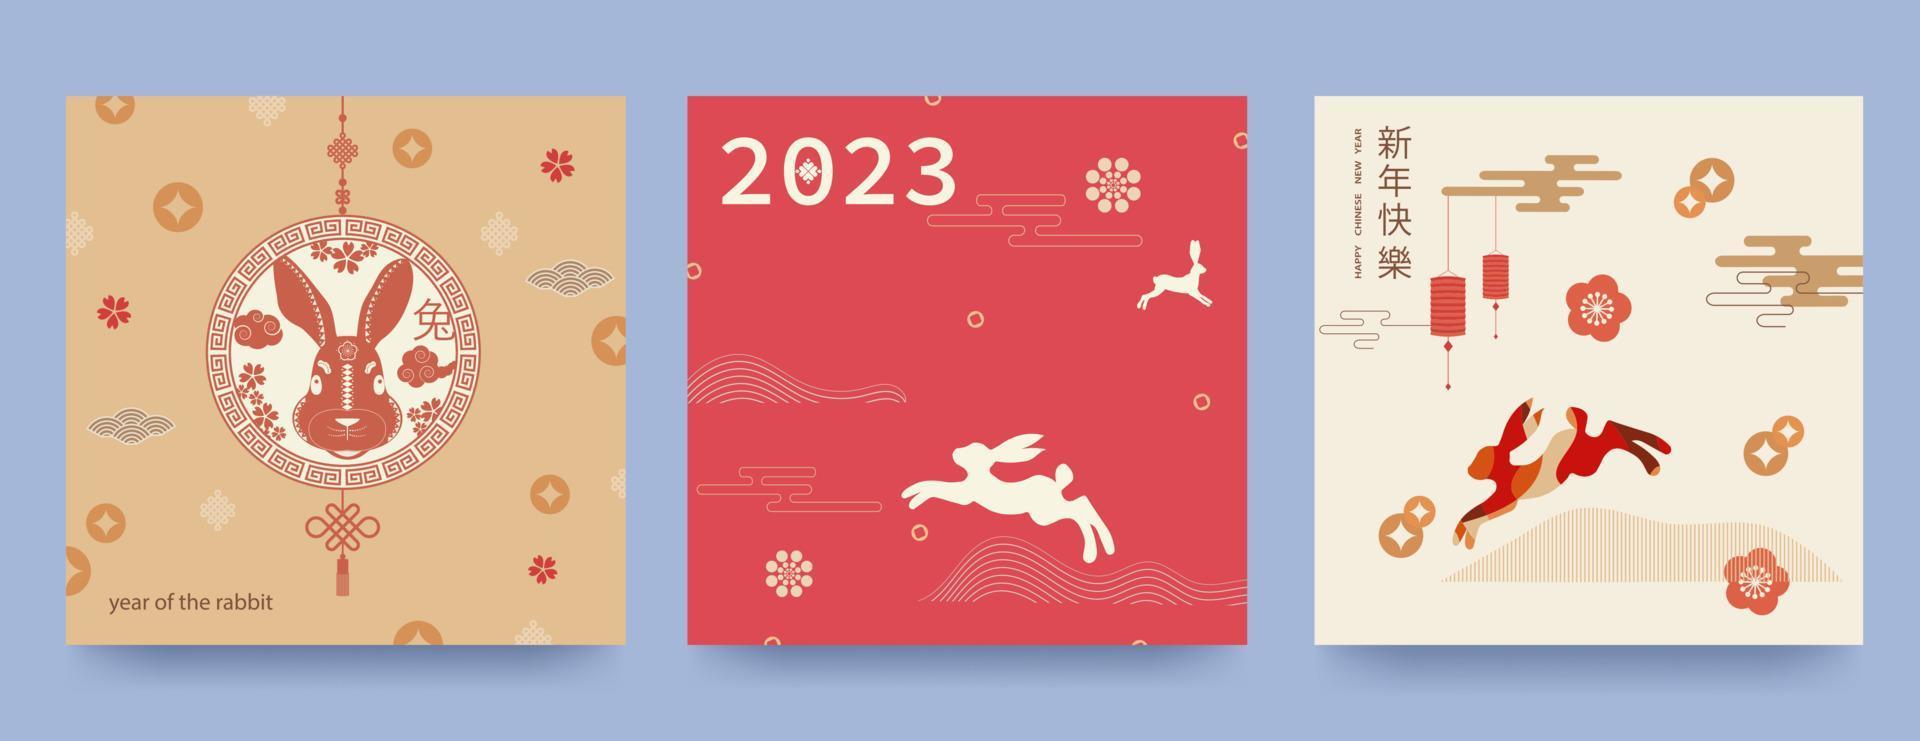 Set of backgrounds,cards, posters,covers Happy New Chinese Year of the Rabbit. Minimalistic style, jumping hares, traditional patterns.Chinese translation - Happy New Year,the symbol of the rabbit. vector